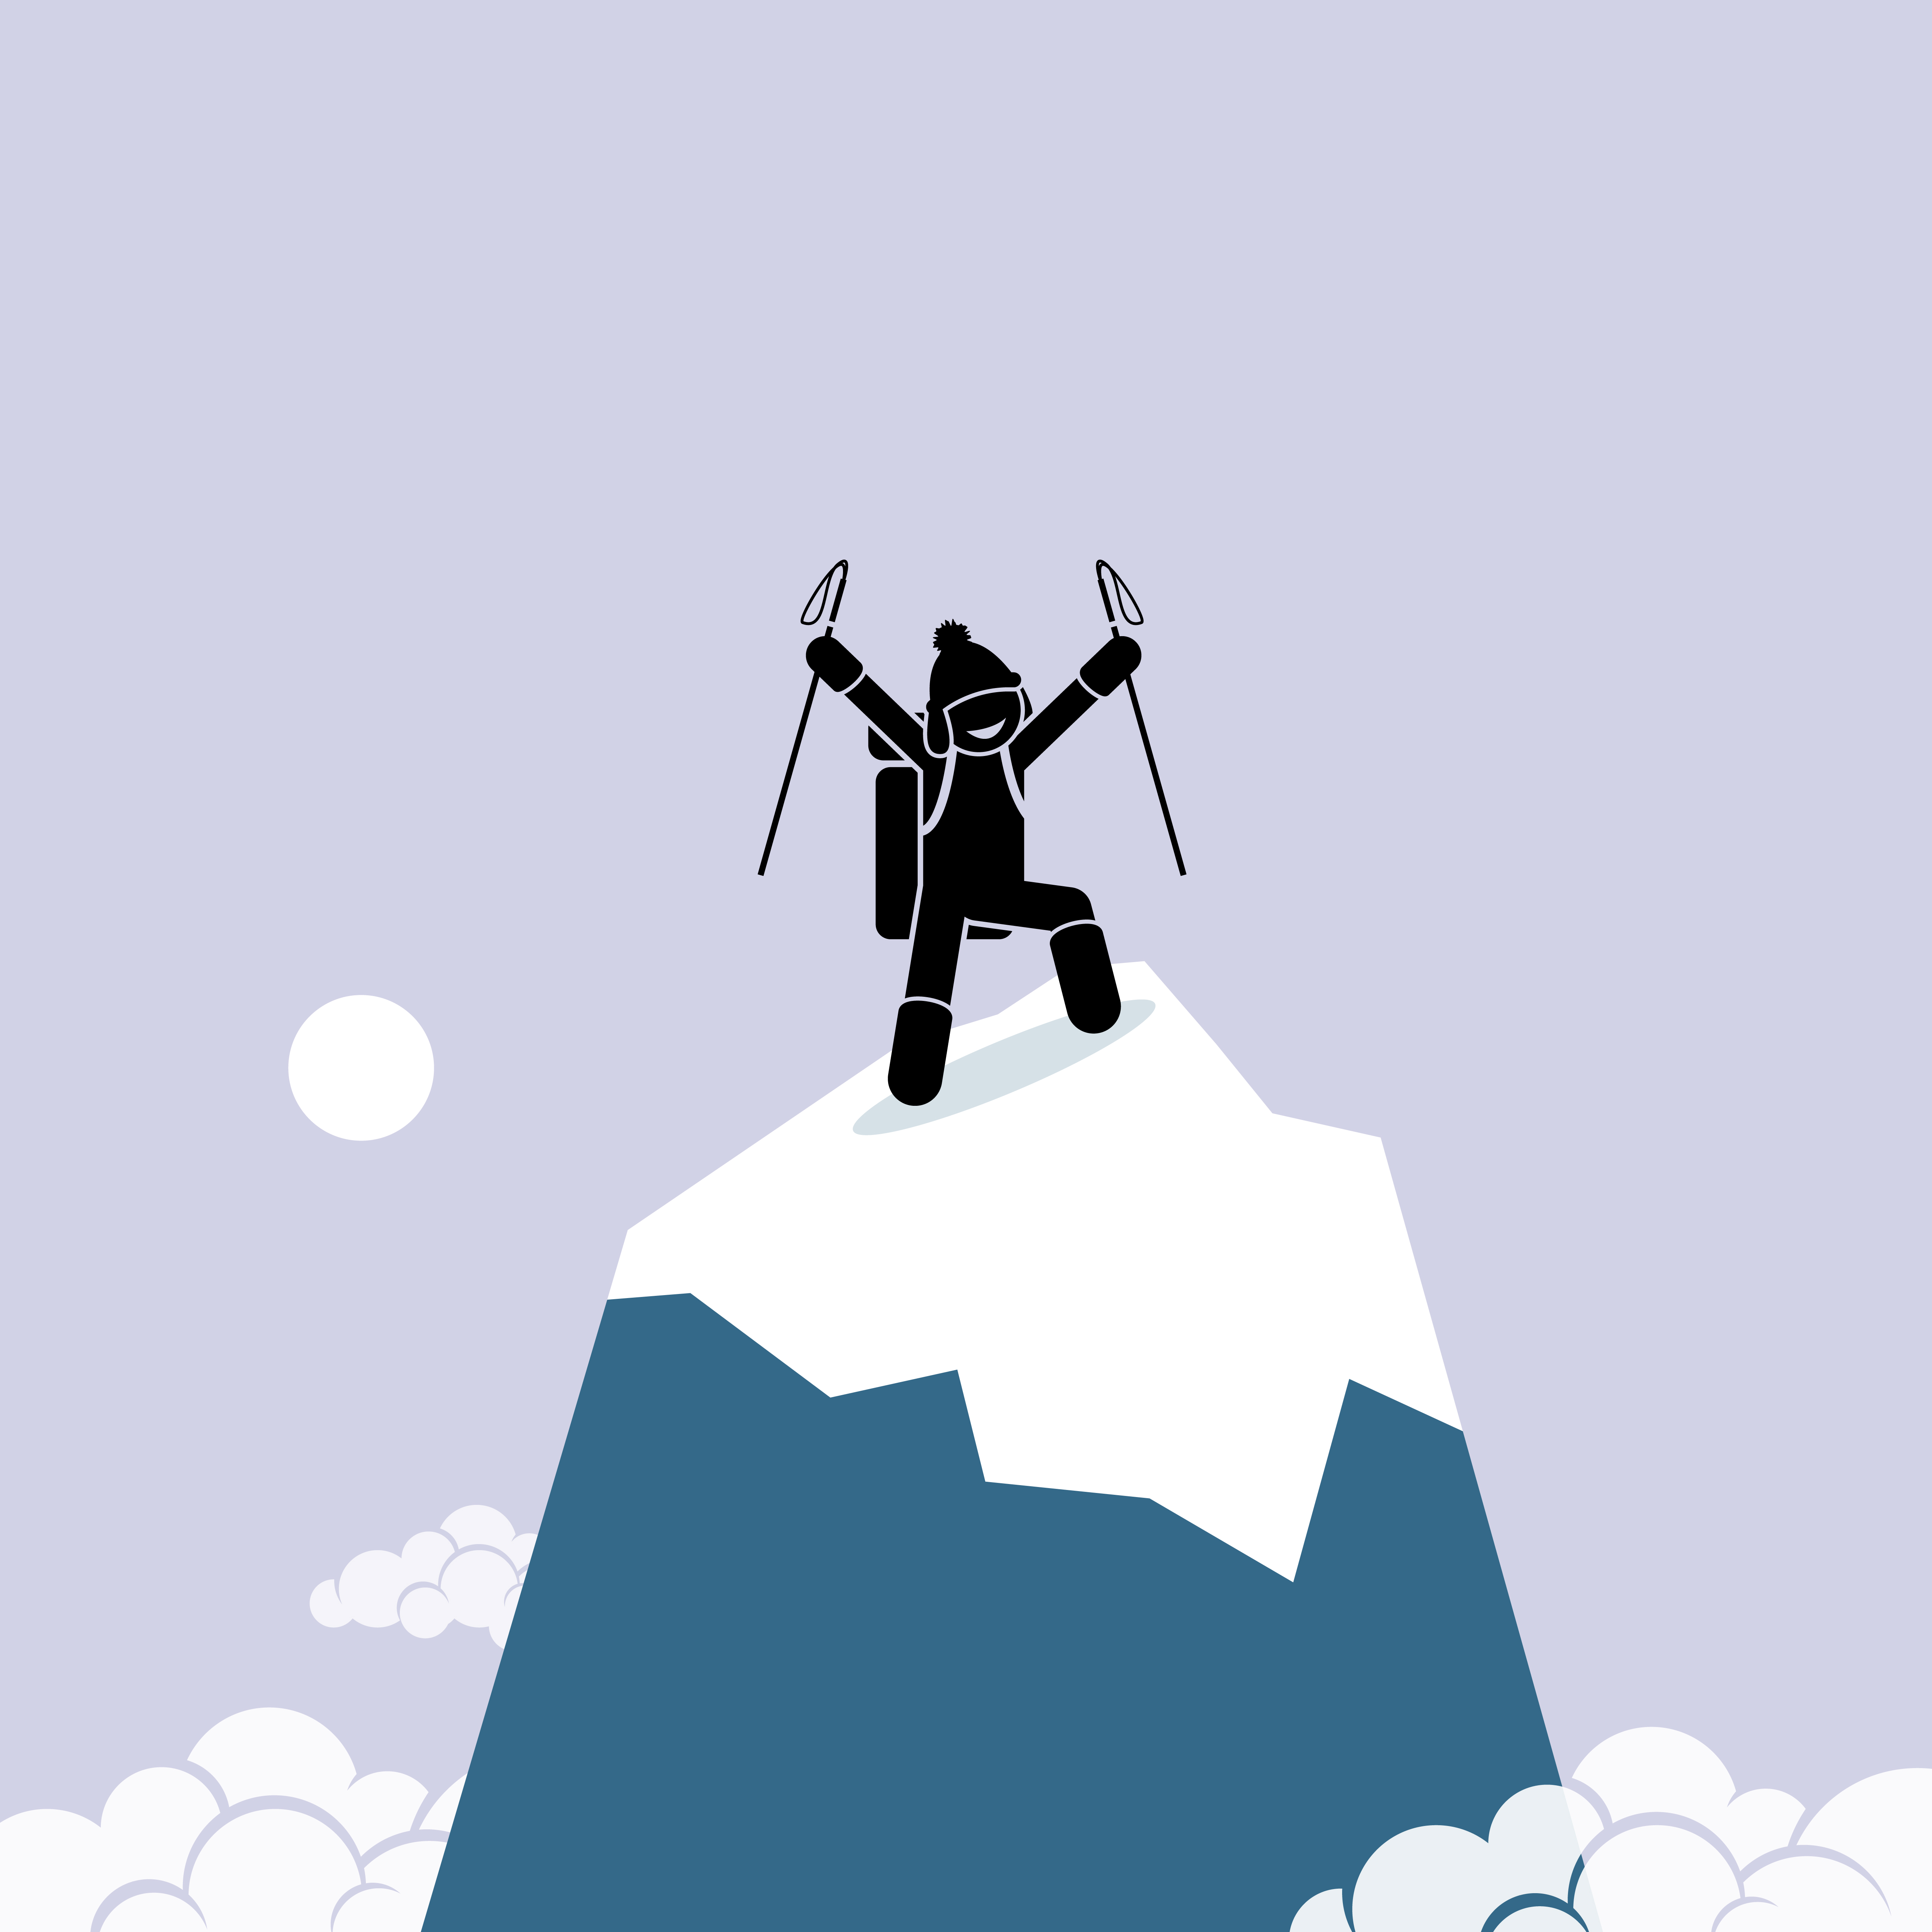 Happy Man Successfully Climb On Top Of The Mountain Download Free Vectors Clipart Graphics Vector Art